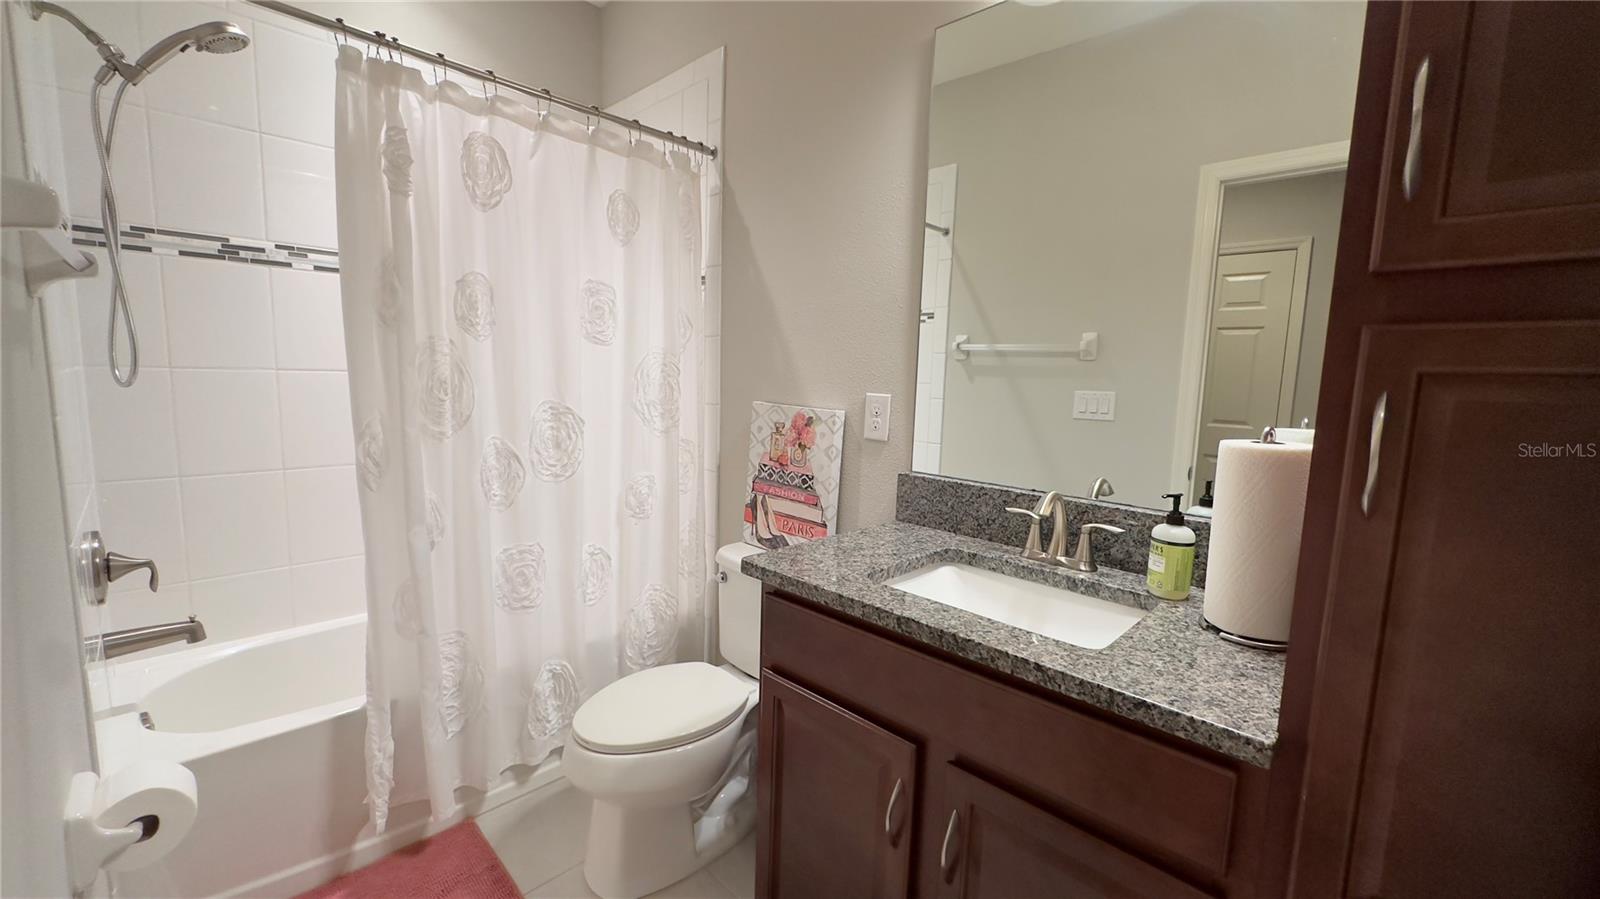 Bathroom #3 conveniently sits between Bedroom #3 and the Bonus room, boasting of a full bath withtub/shower combo…